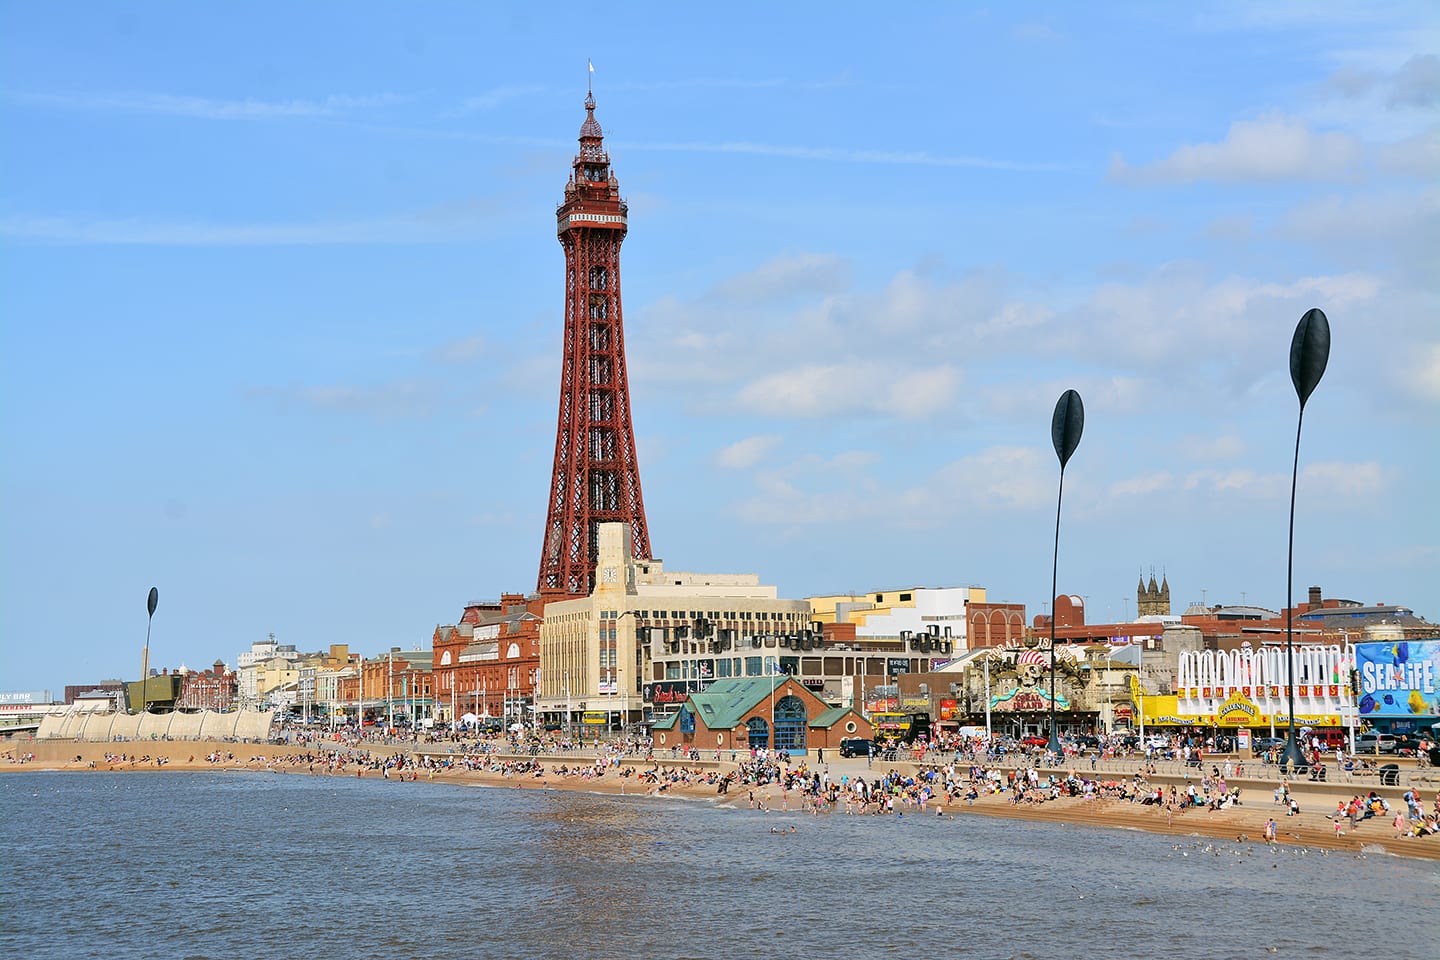 Looking along Blackpool seafront and promenade from central pier